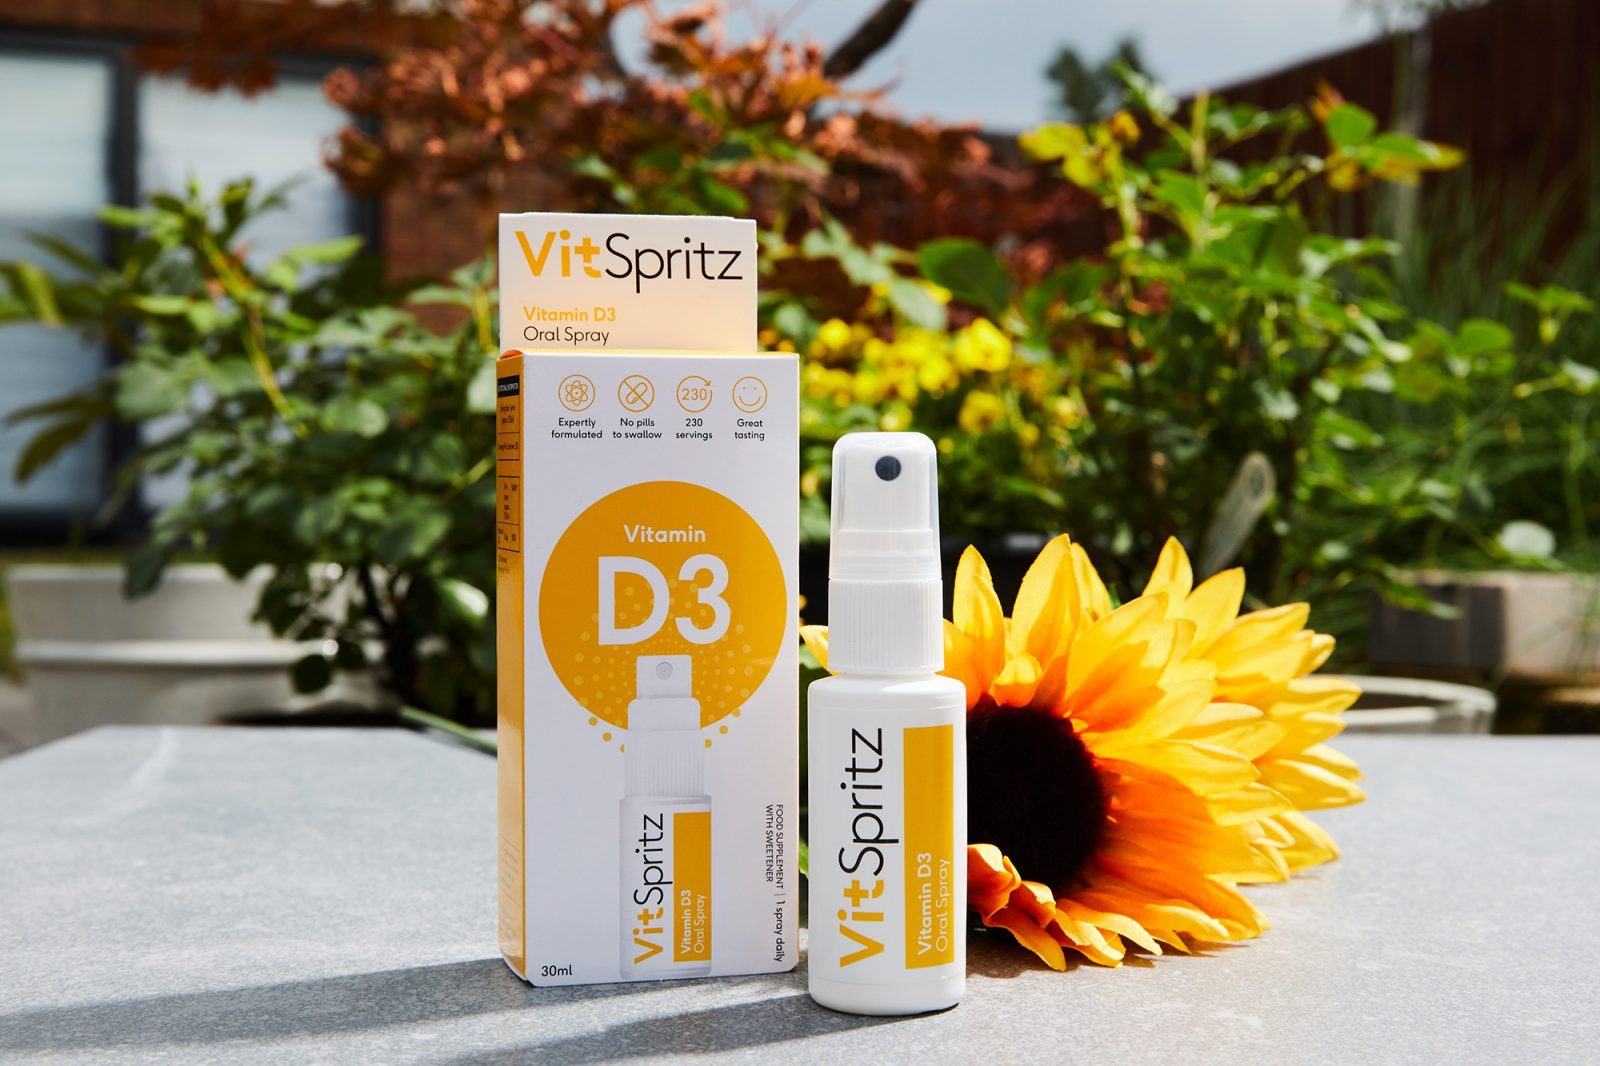 Branding, Packaging Design and Promotional Imagery for VitSpritz a New Vitamin Brand